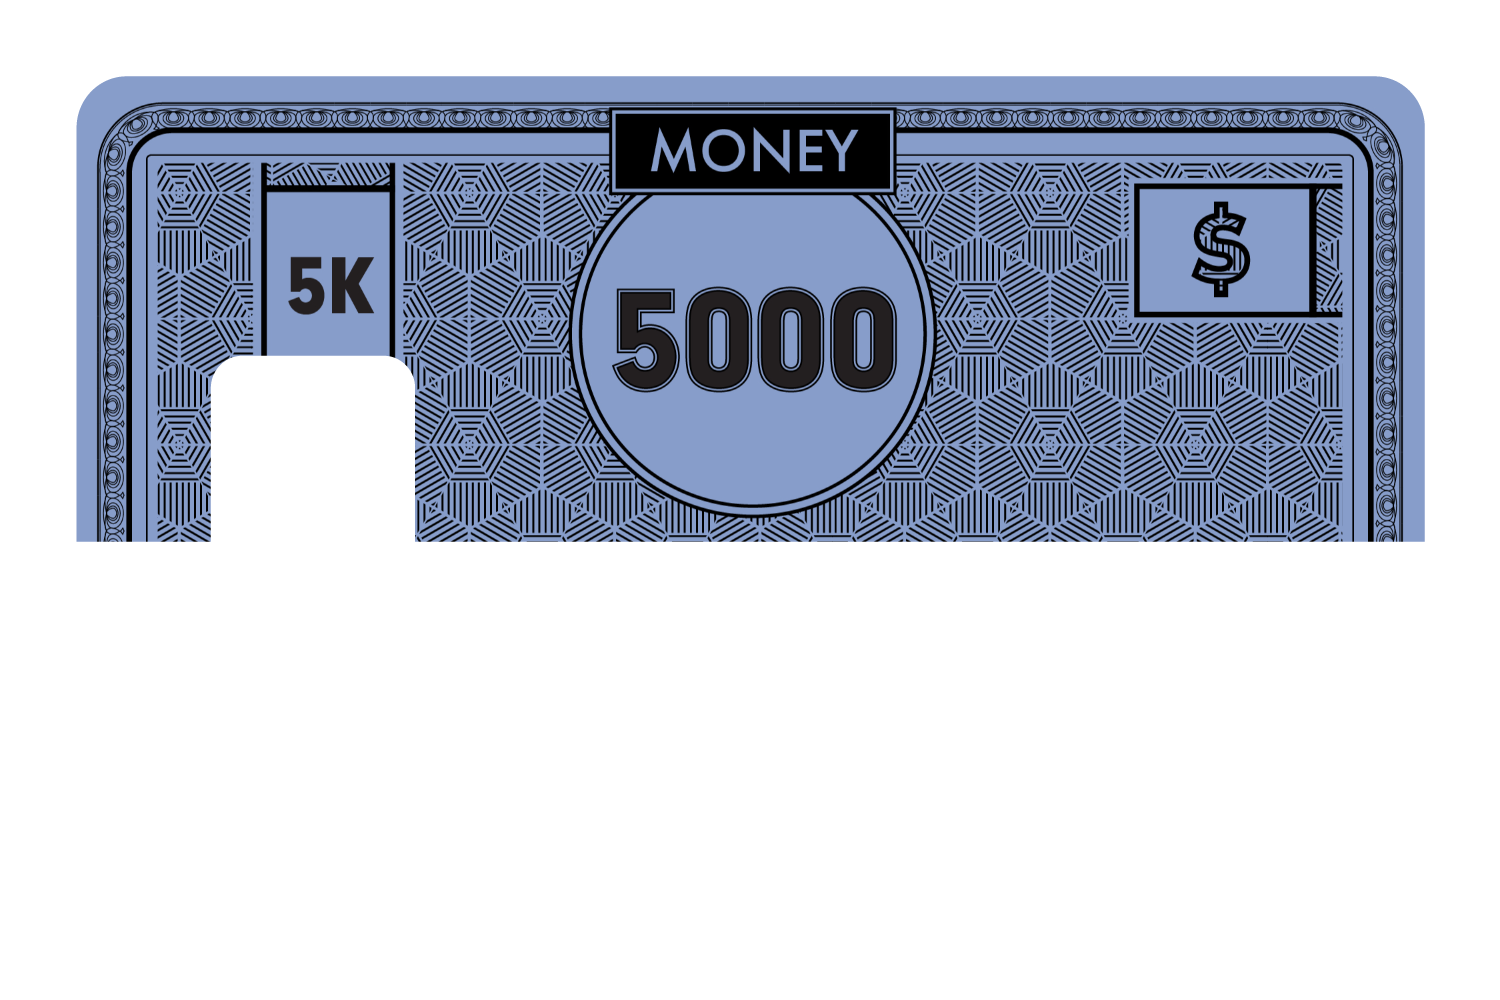 $5000 Note